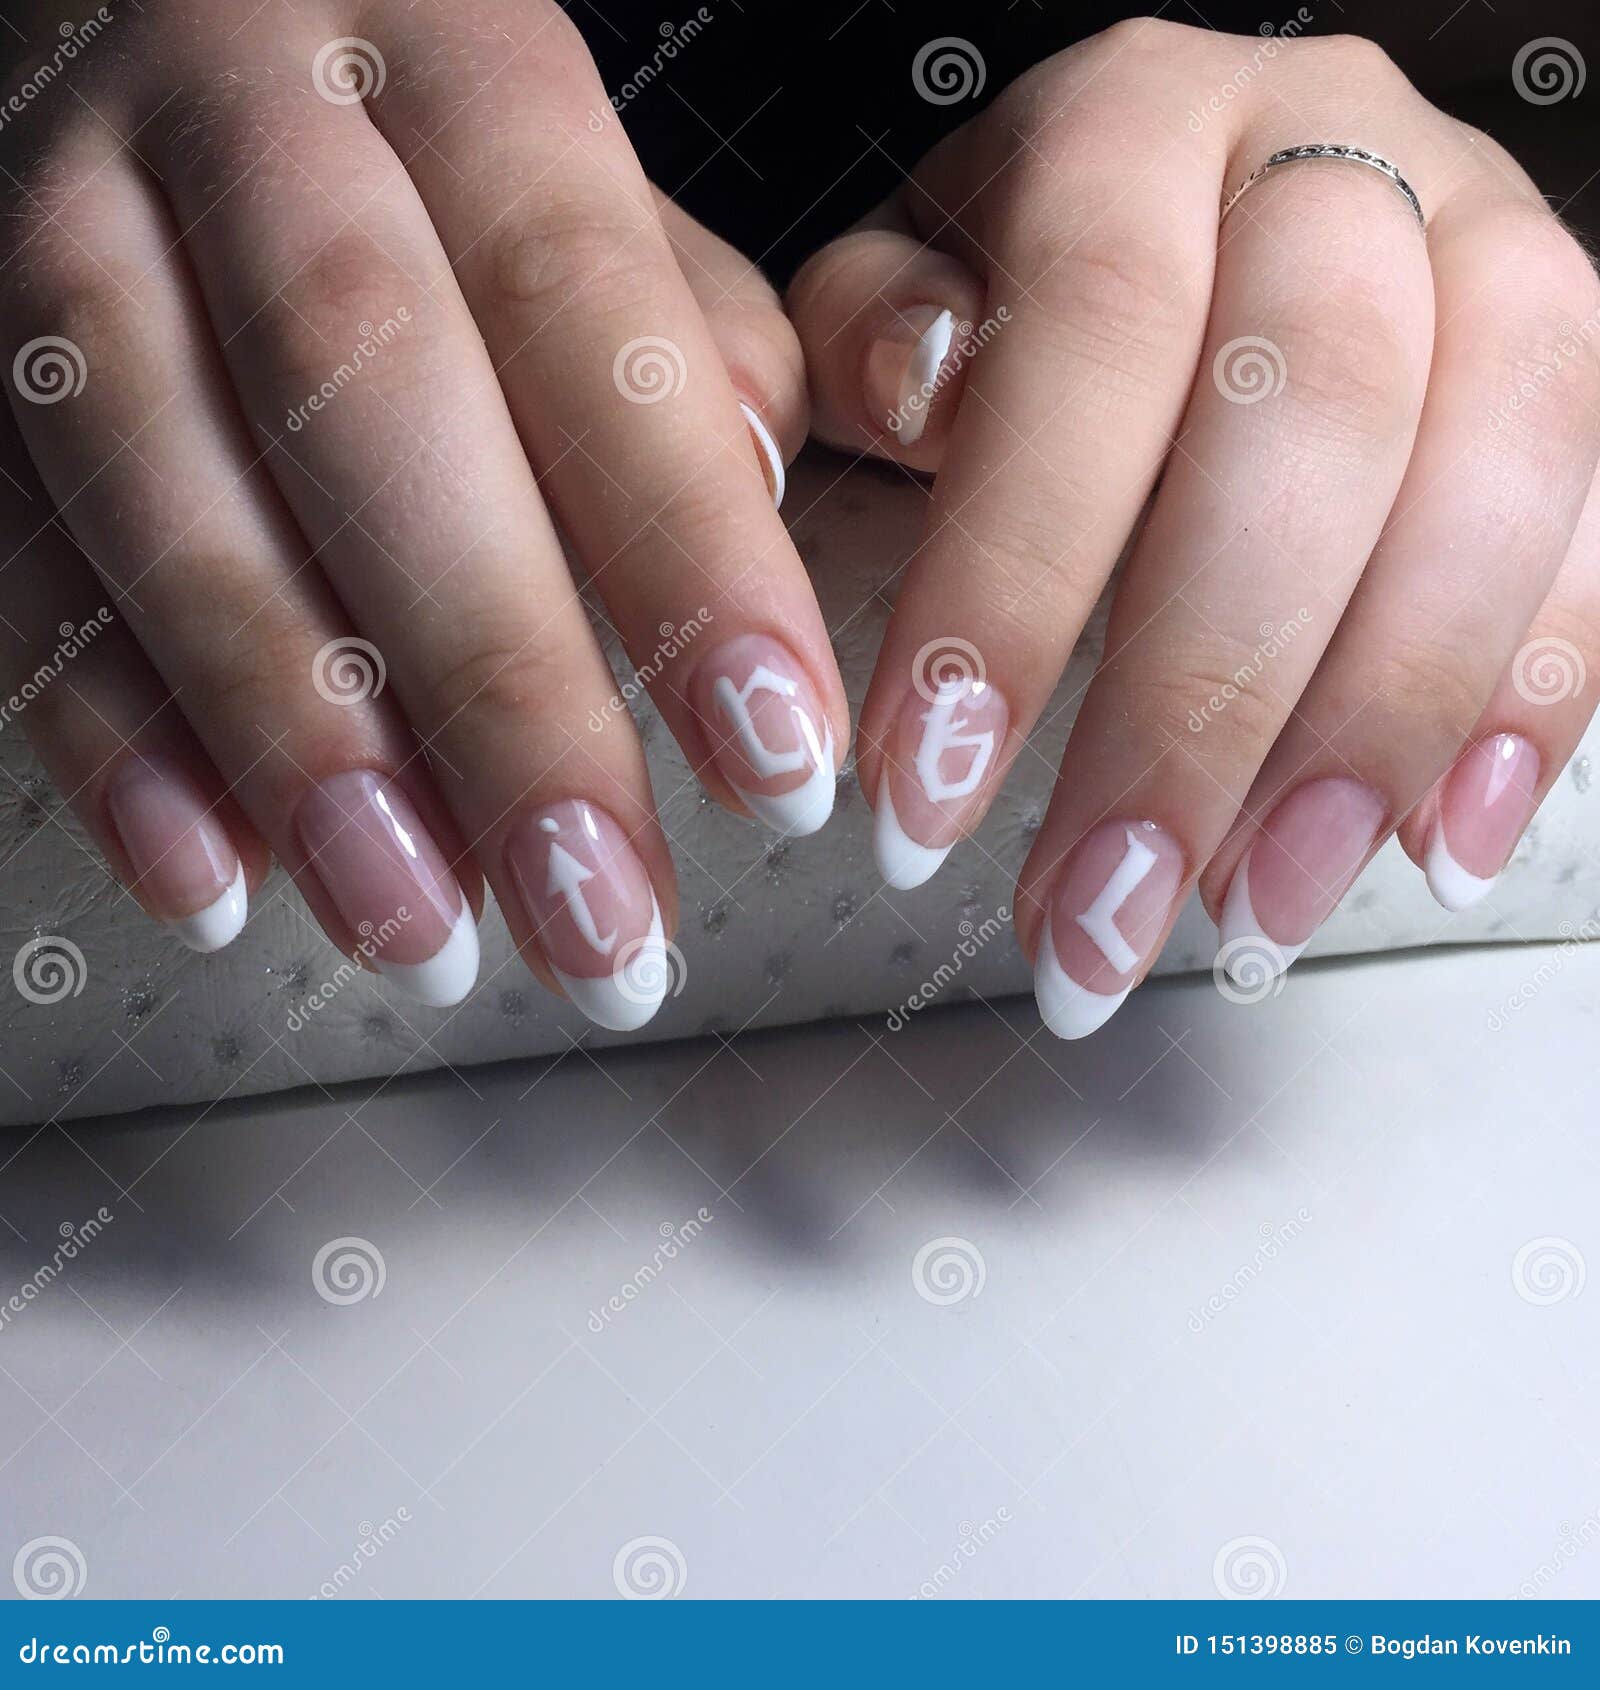 French Manicure on the Nails. French Manicure Design Stock Image - Image of  cuticle, color: 151398885